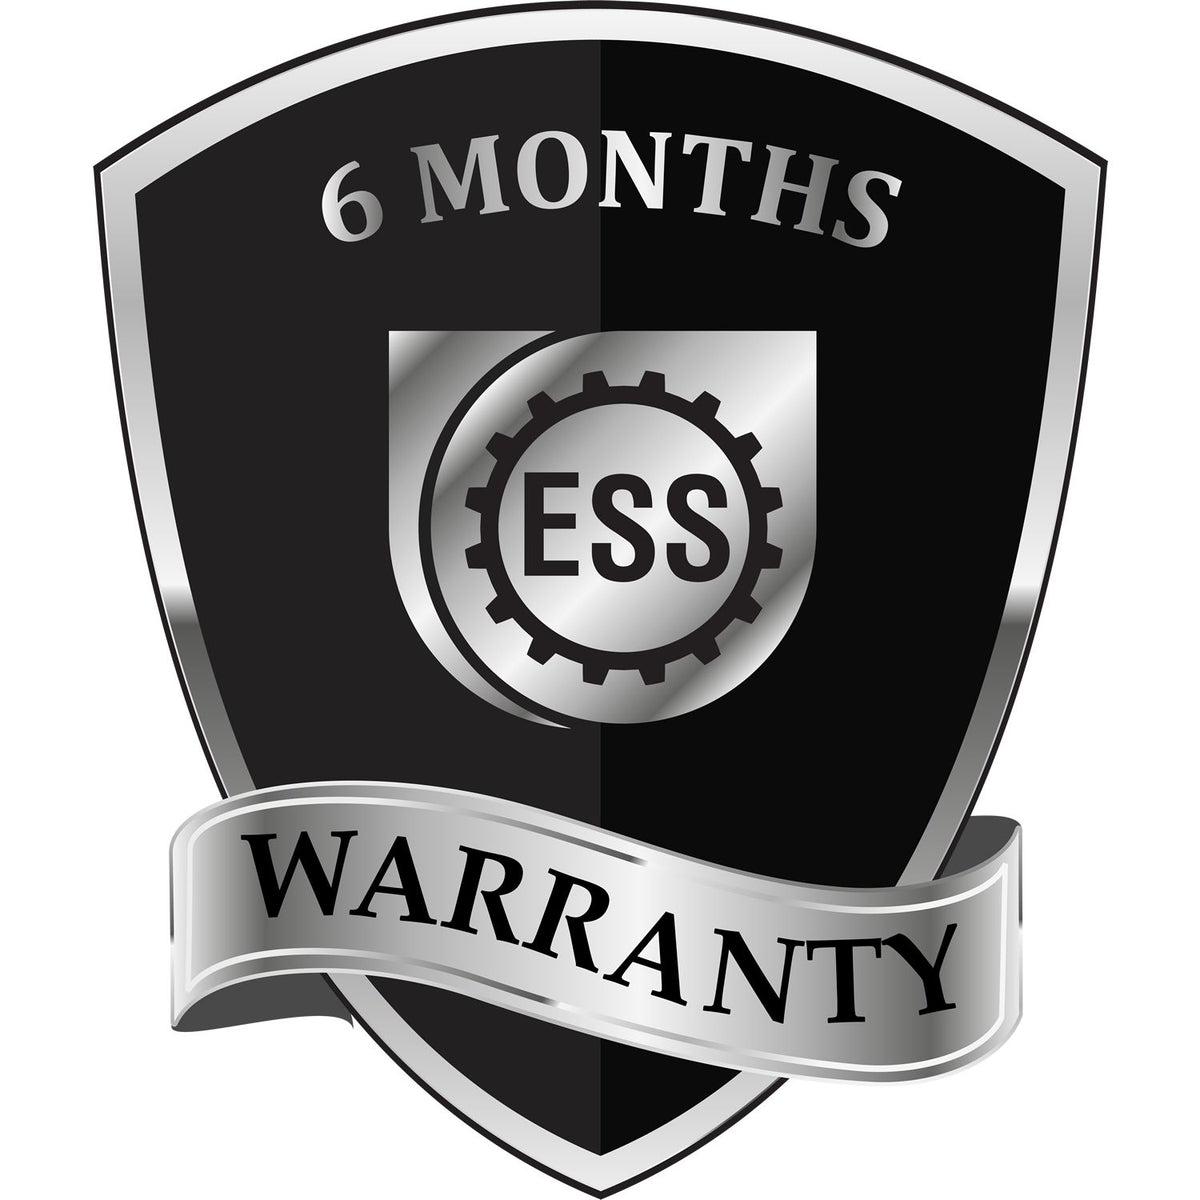 A black and silver badge or emblem showing warranty information for the Rhode Island Professional Geologist Seal Stamp